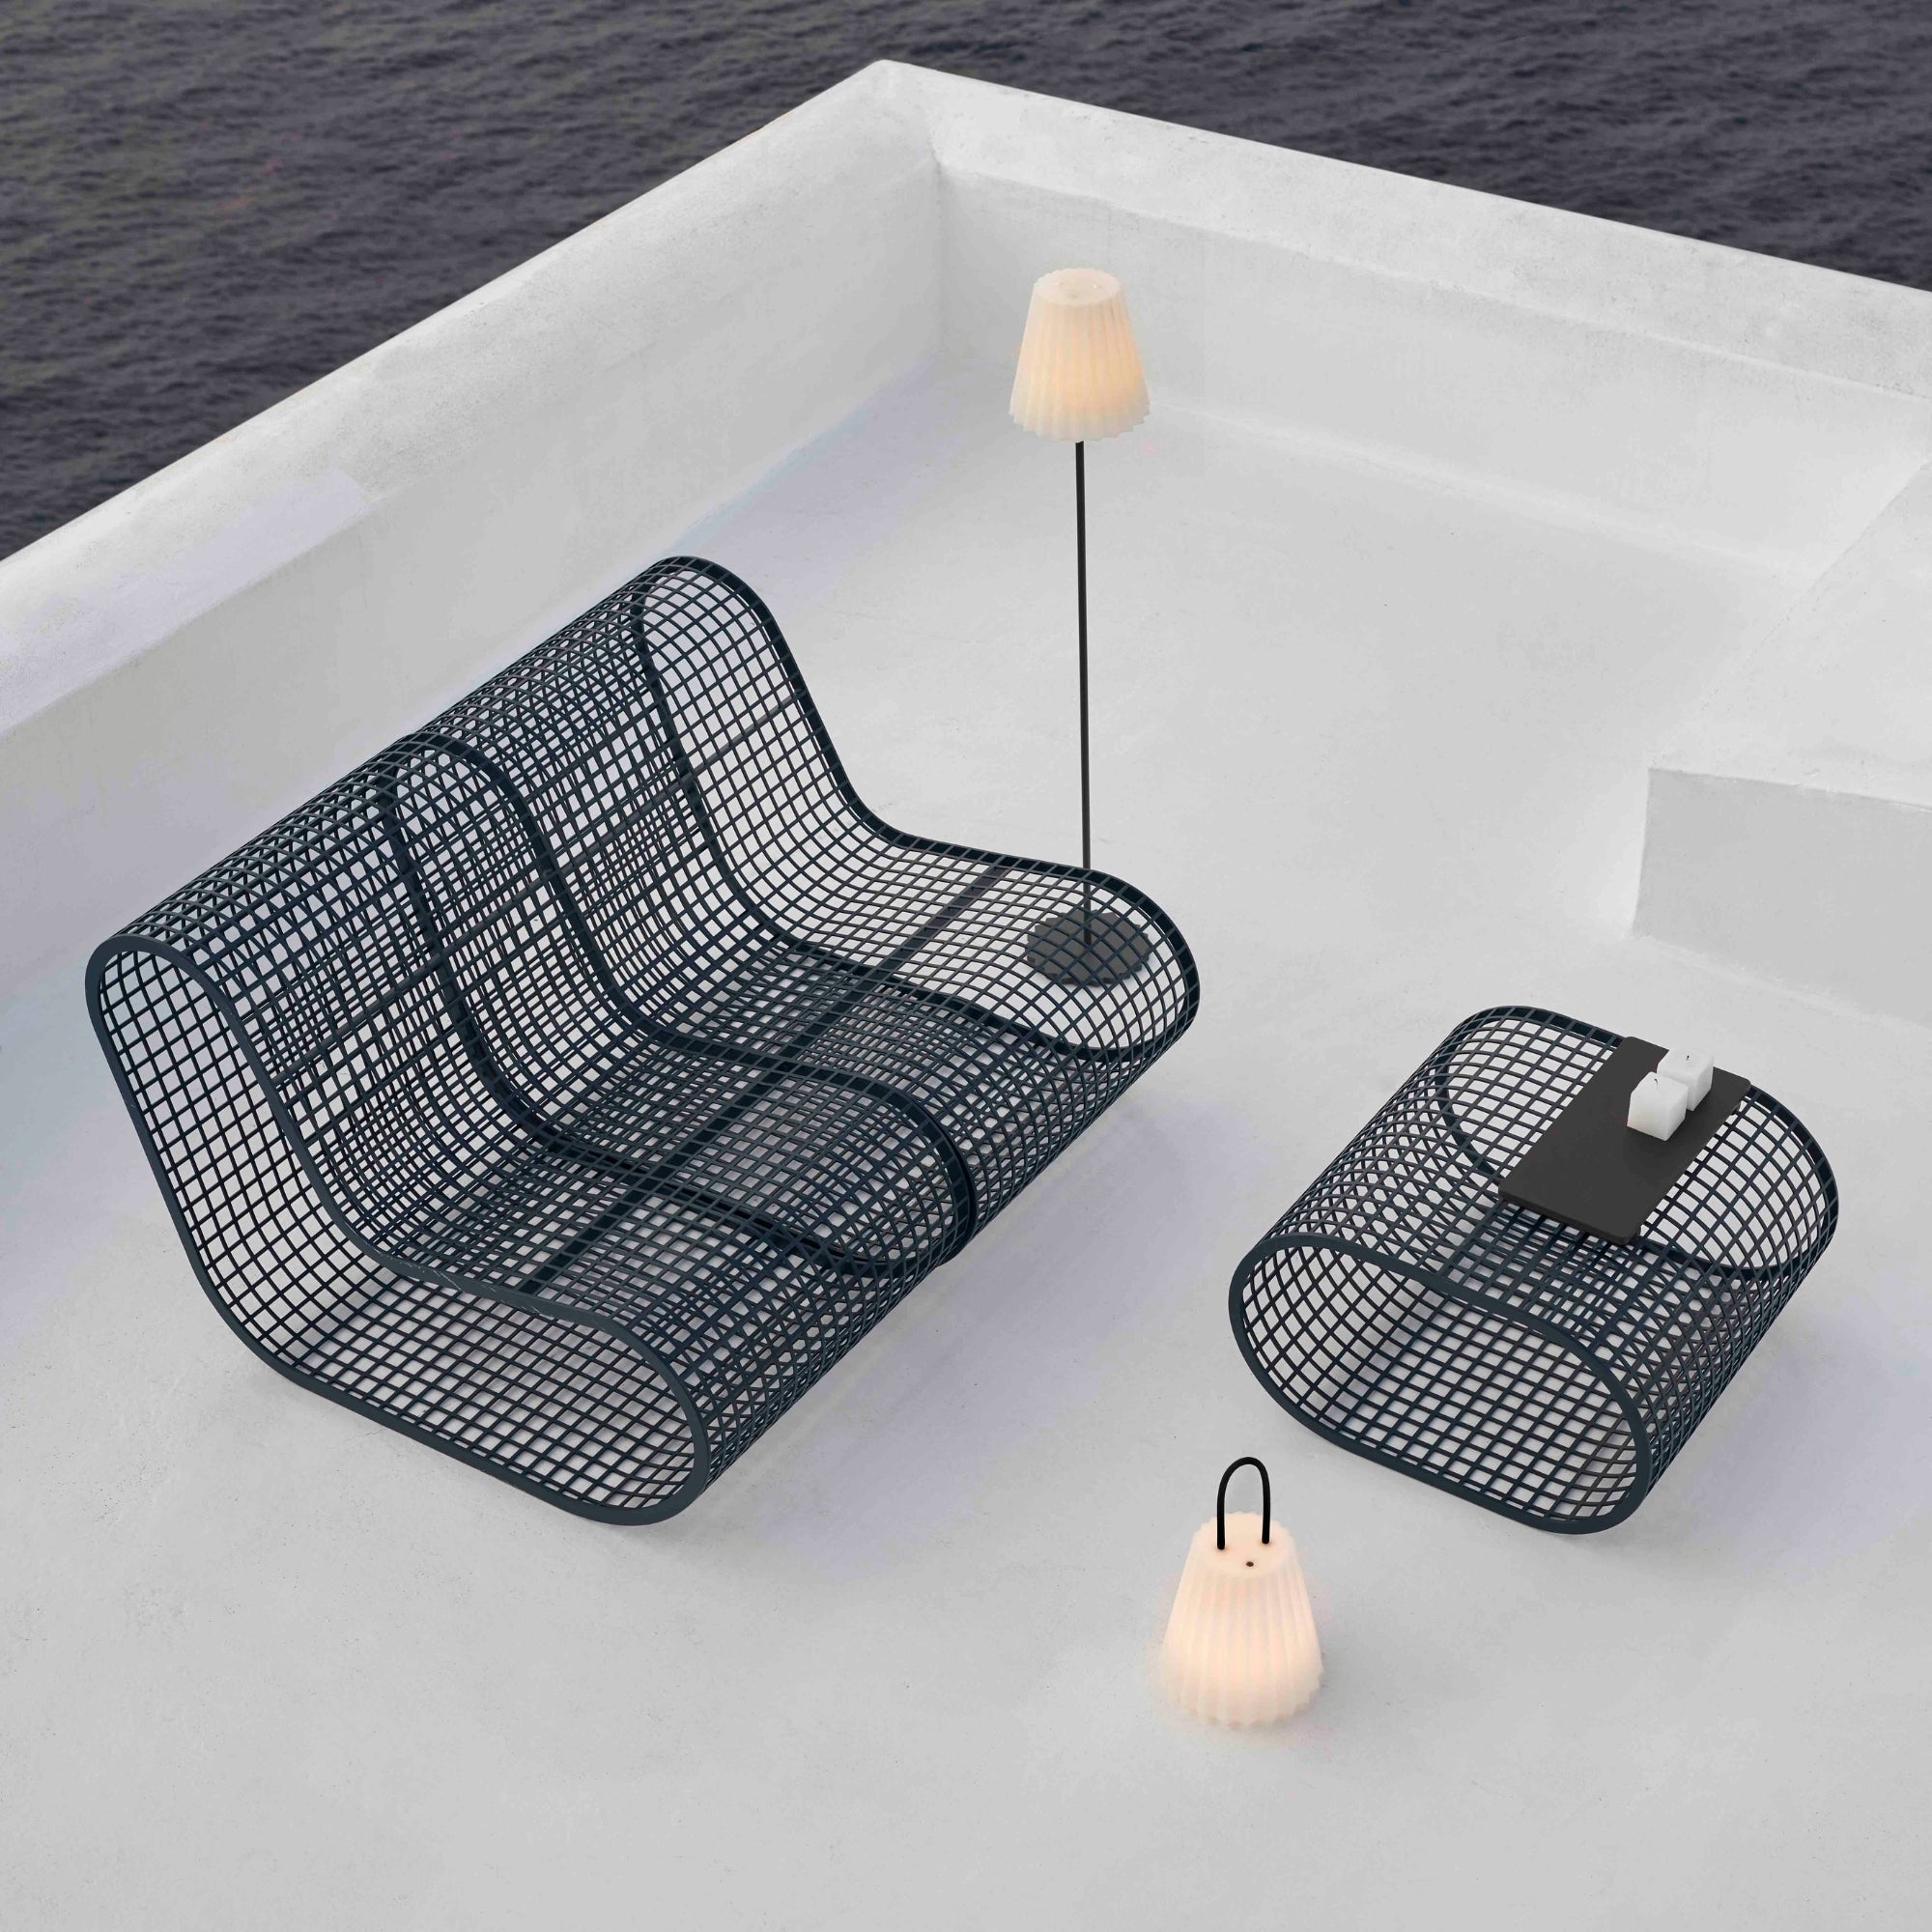 Buit Armchair - THAT COOL LIVING